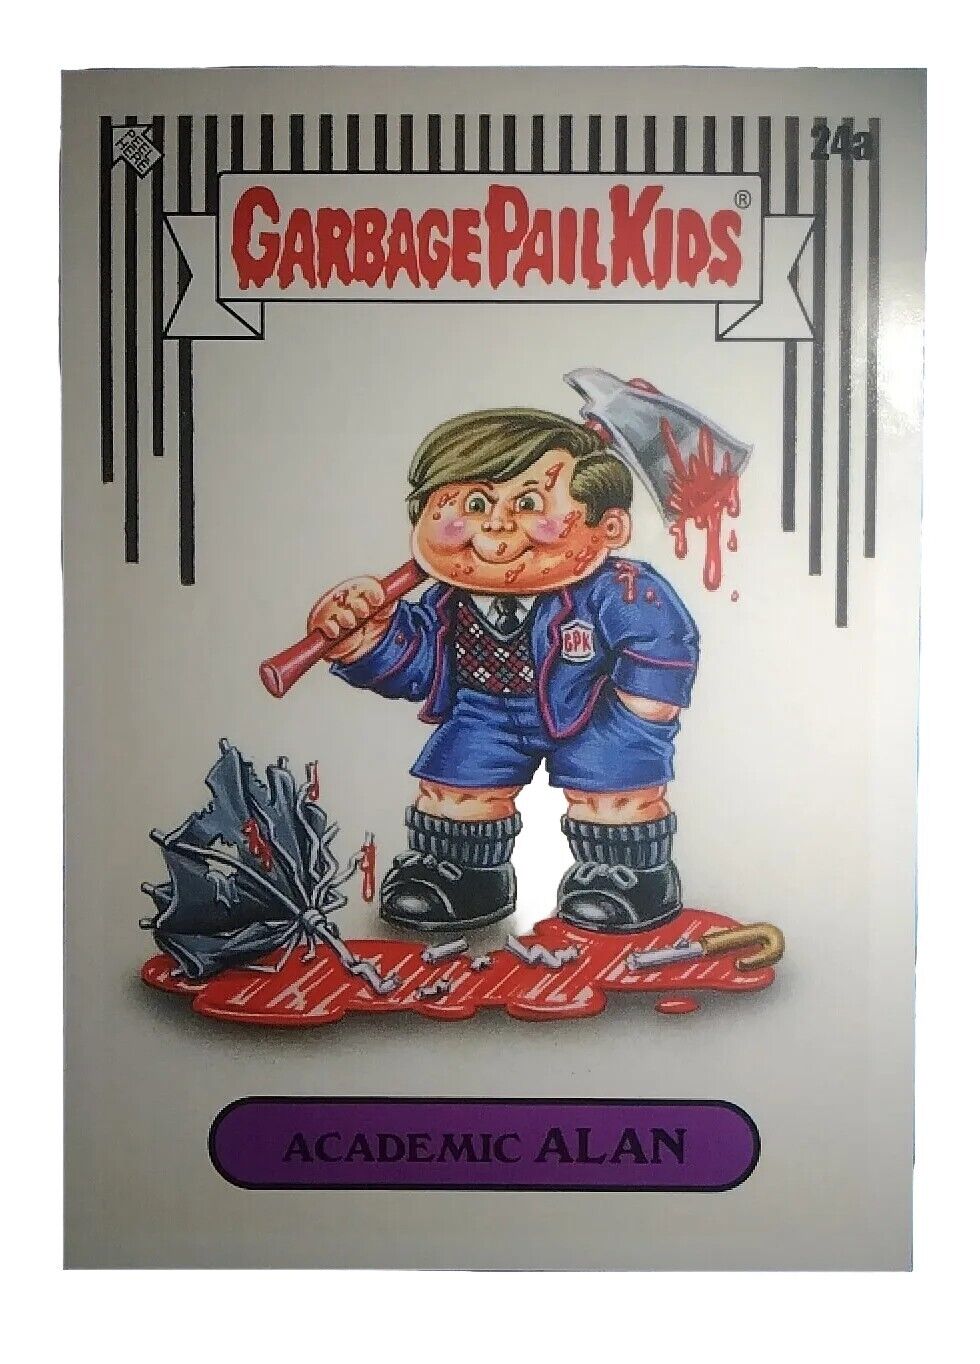 Topps 2022 GARBAGE PAIL KIDS book worms • ACADEMIC ALAN Gross Adaptations (#24a)